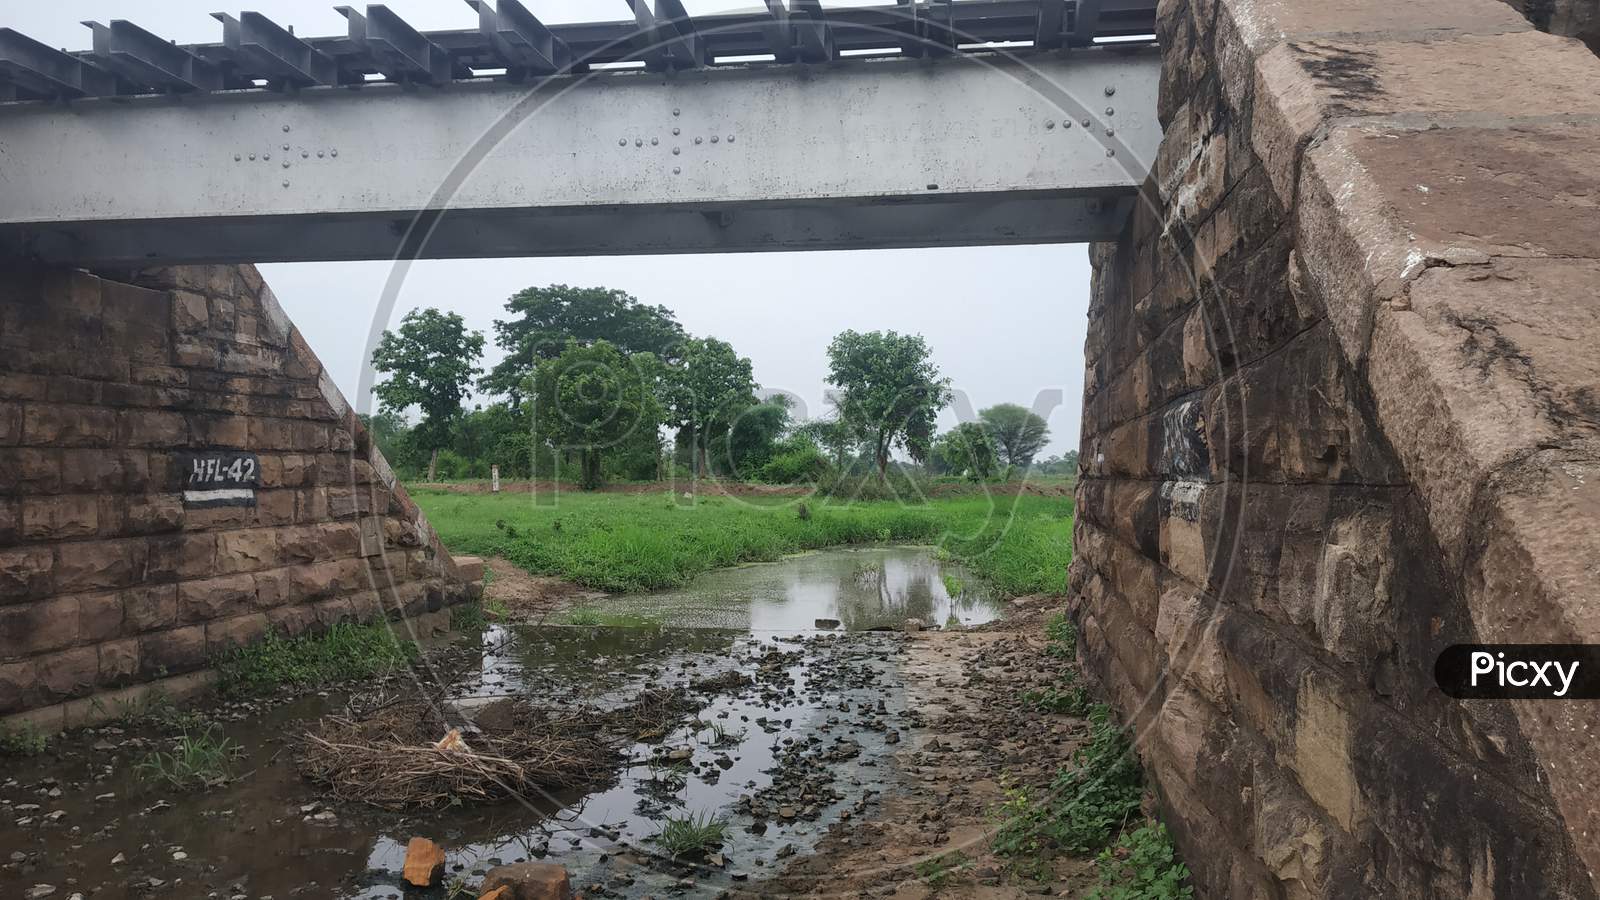 Old Railway Bridge In India With Green Grass And Stream Under In It